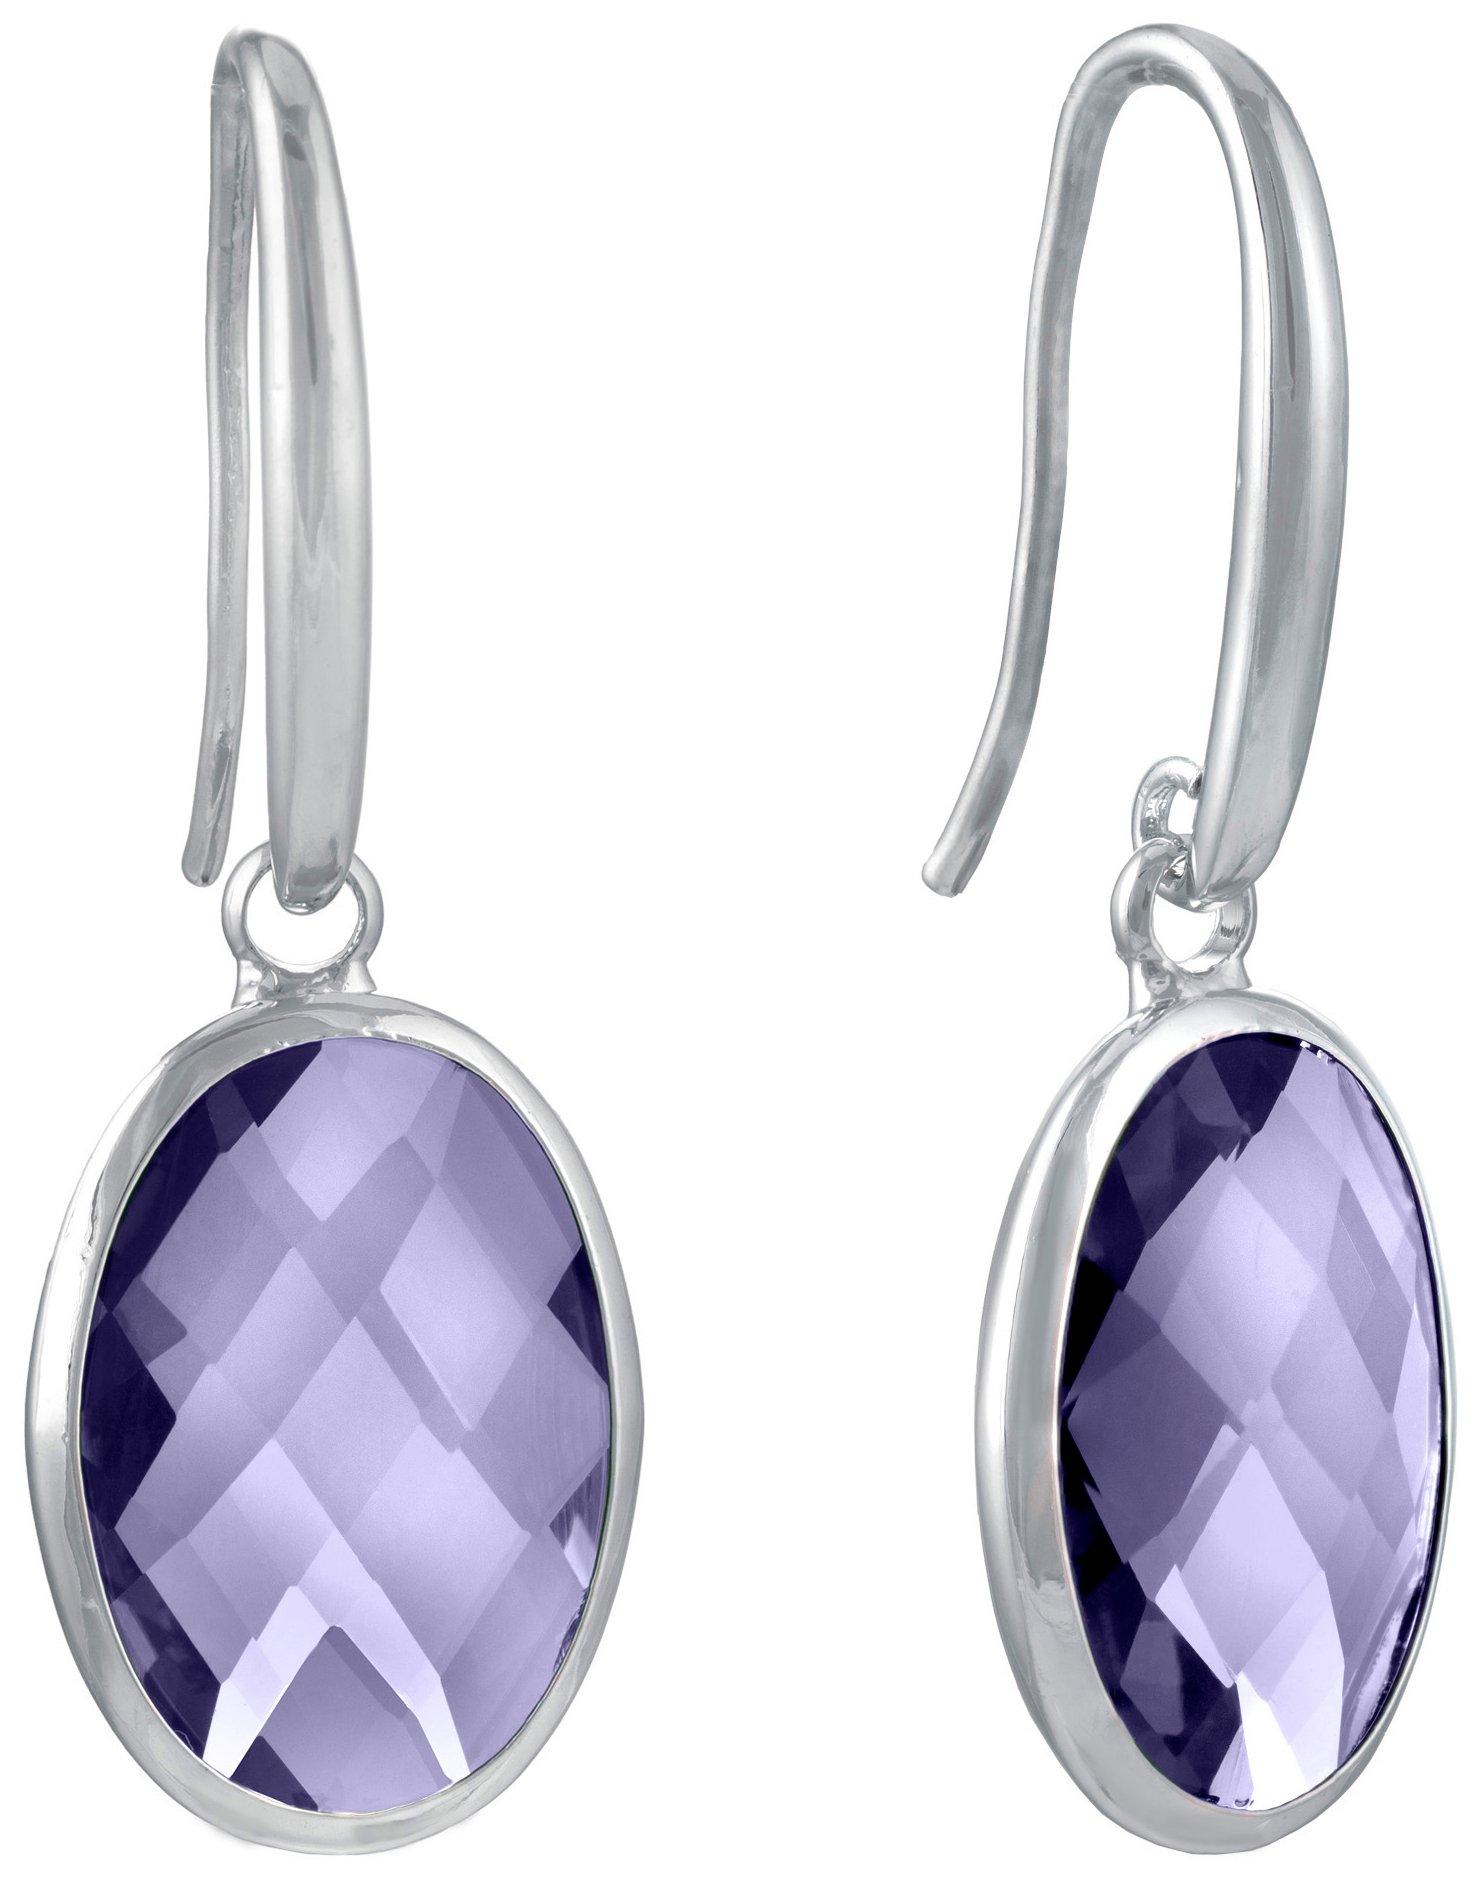 Faceted Oval Glass Dangle Earrings